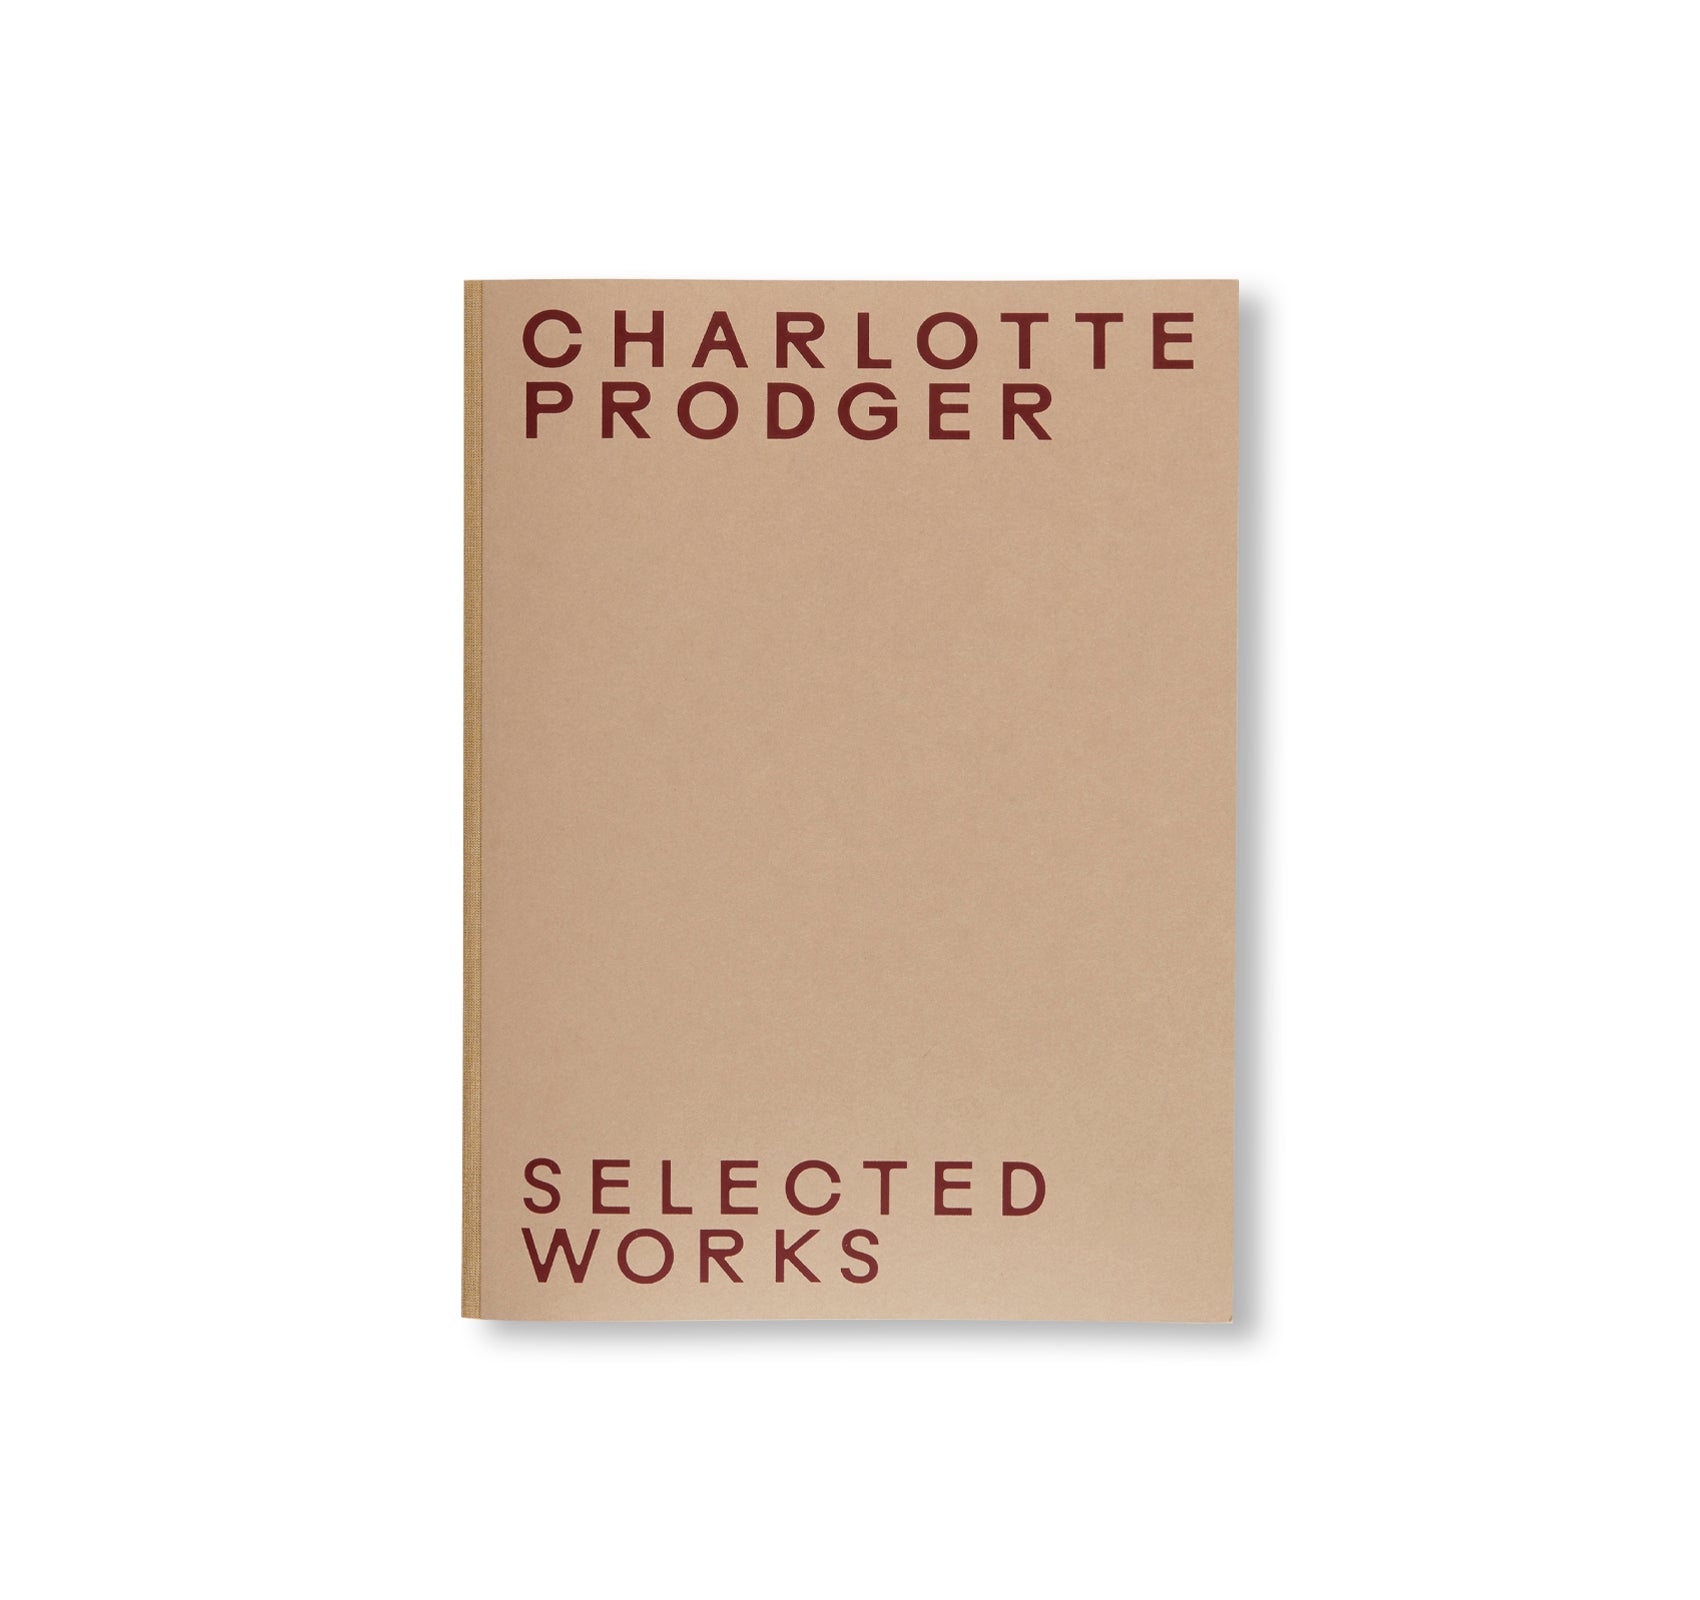 SELECTED WORKS by Charlotte Prodger